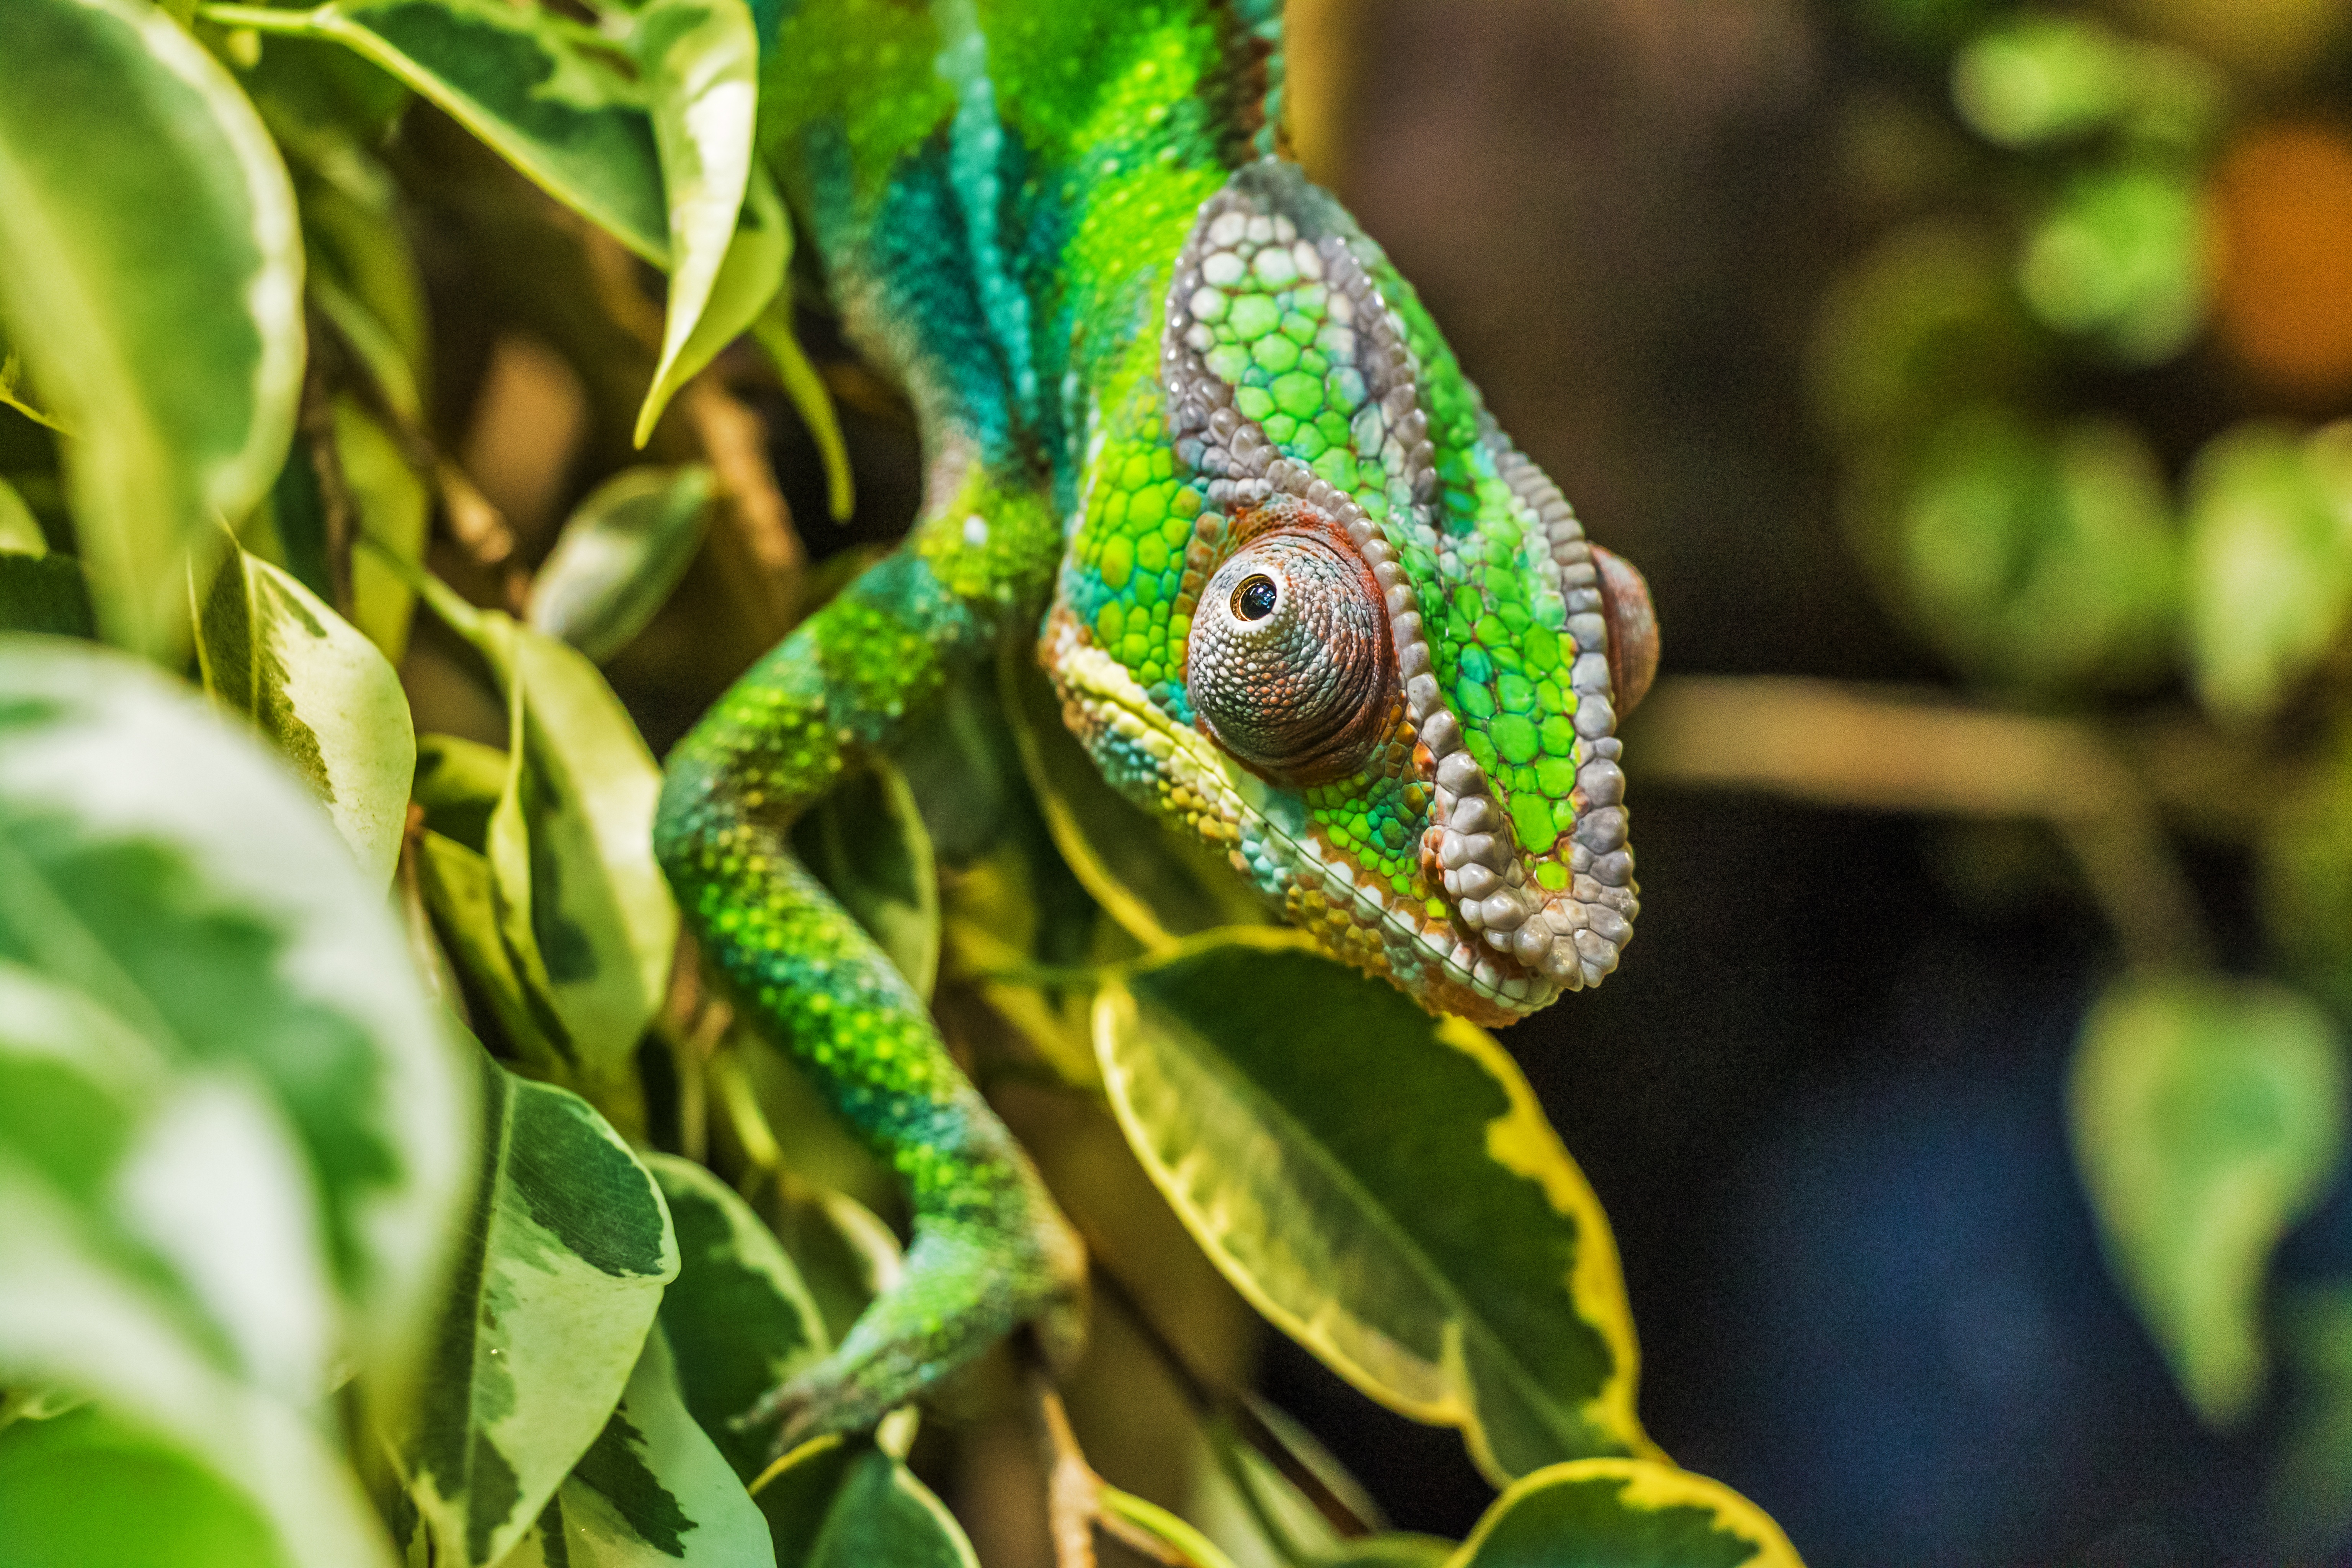 animals, color, reptile, disguise, camouflage, chameleon